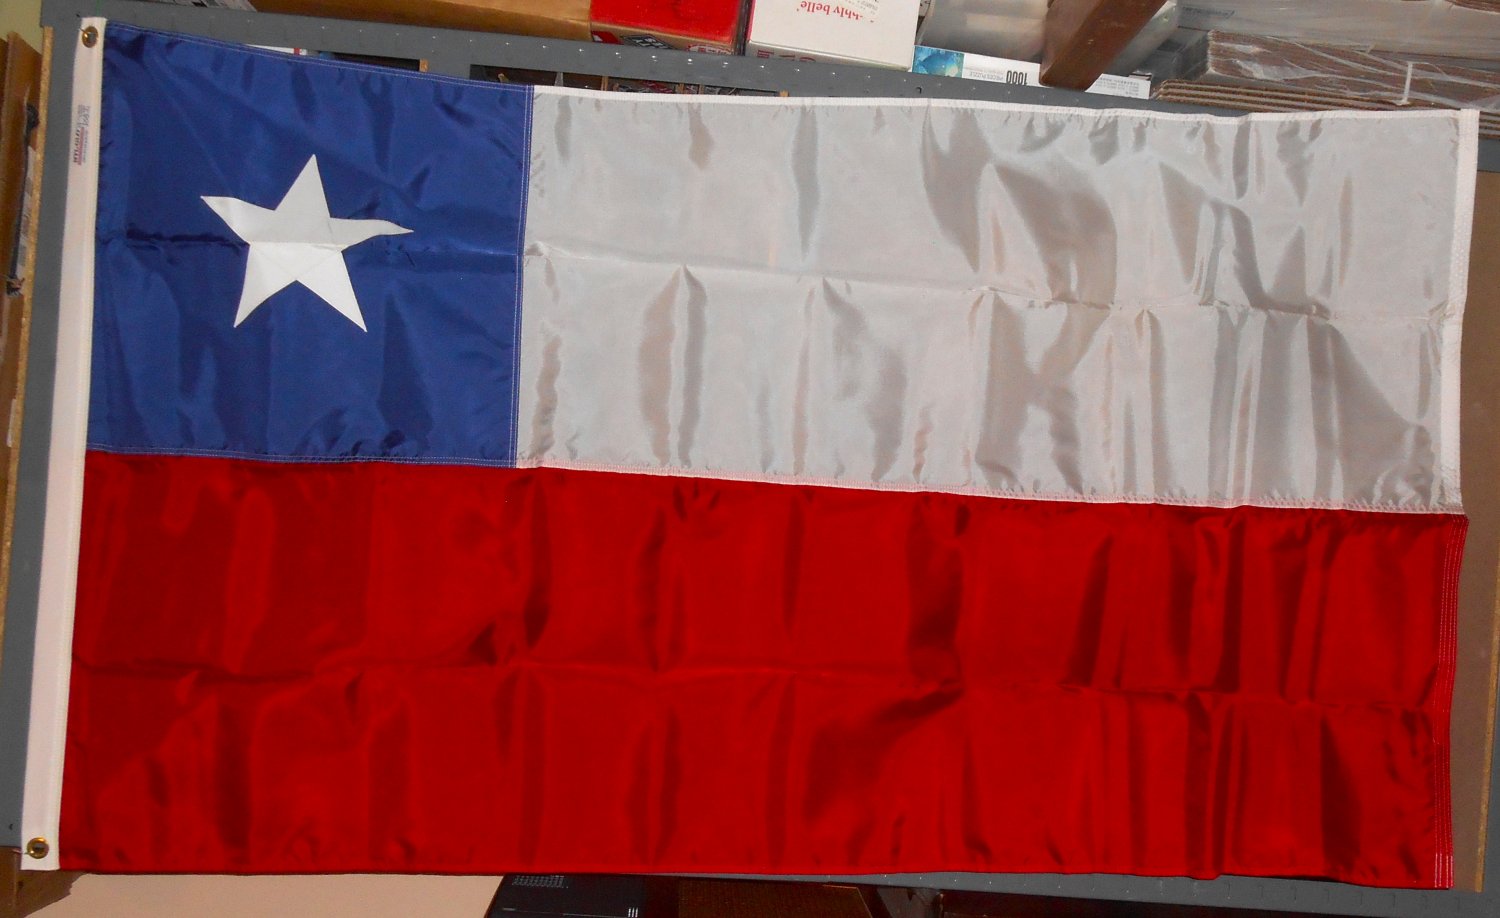 Chile Chilean National Flag 3 x 5 Feet NYL-GLO Annin Nylon Bunting Brass Grommets Canvas Header